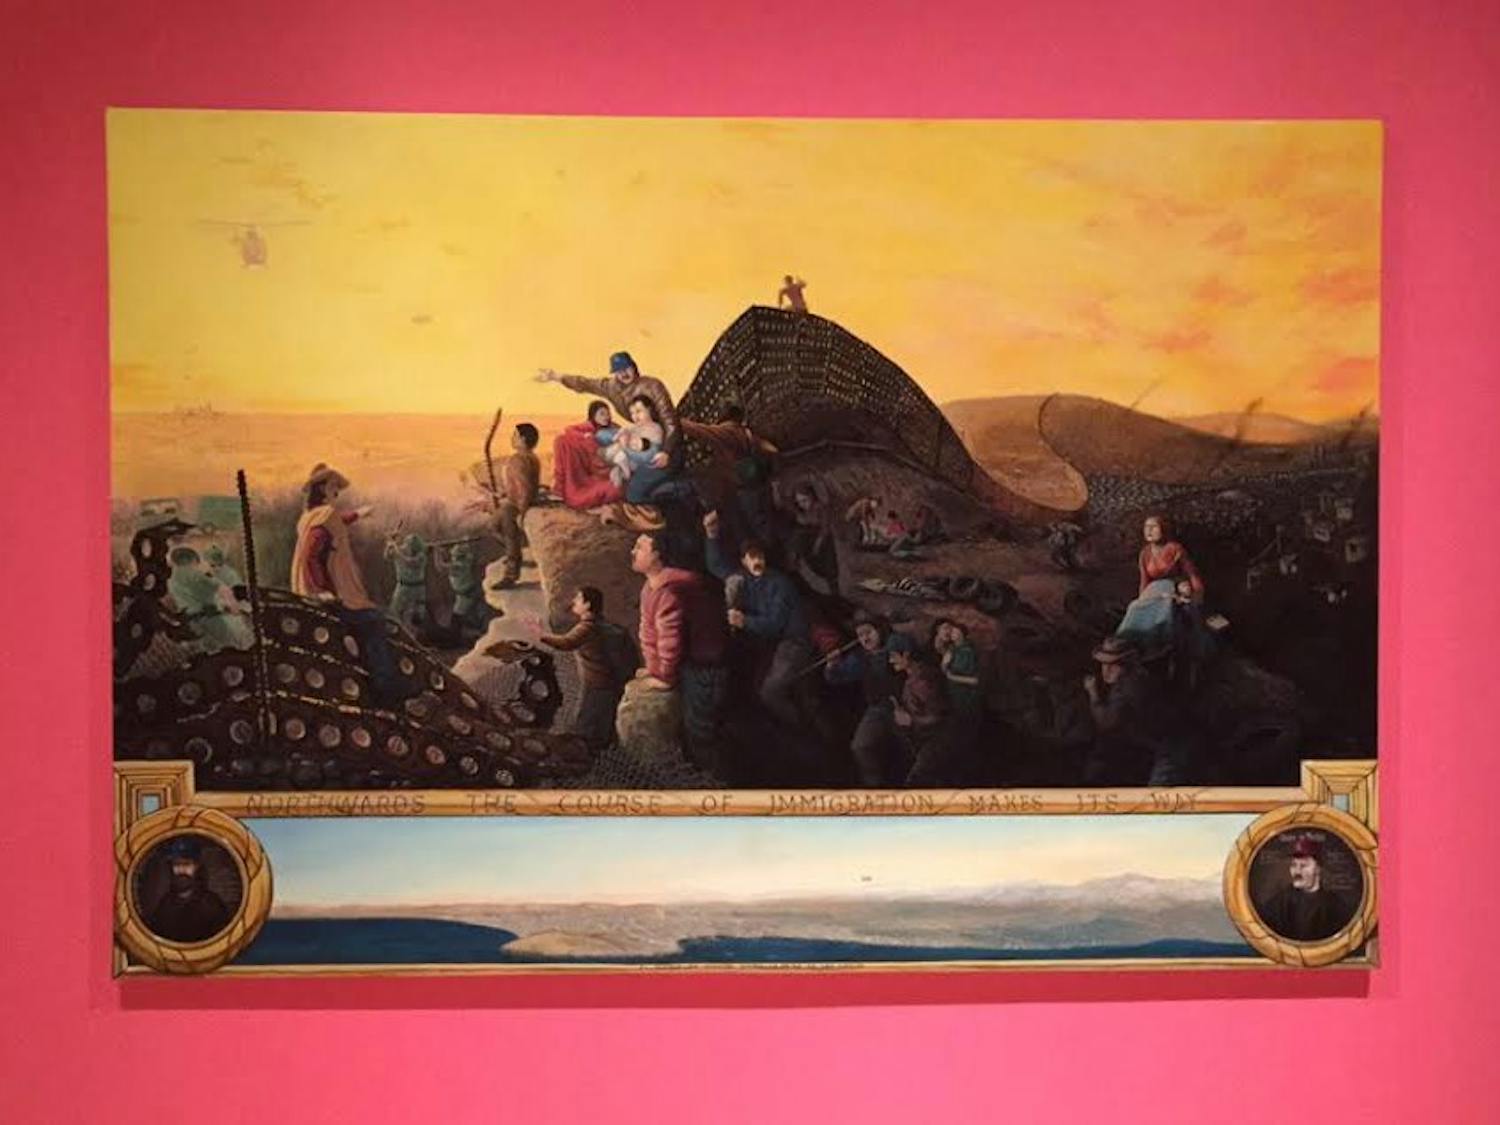 One of the many pieces of wall and sculpture art highlighted in the Violence of Truth exhibition&nbsp;at the ASU Art Museum in Tempe, Arizona on Wednesday, Feb. 8, 2017.